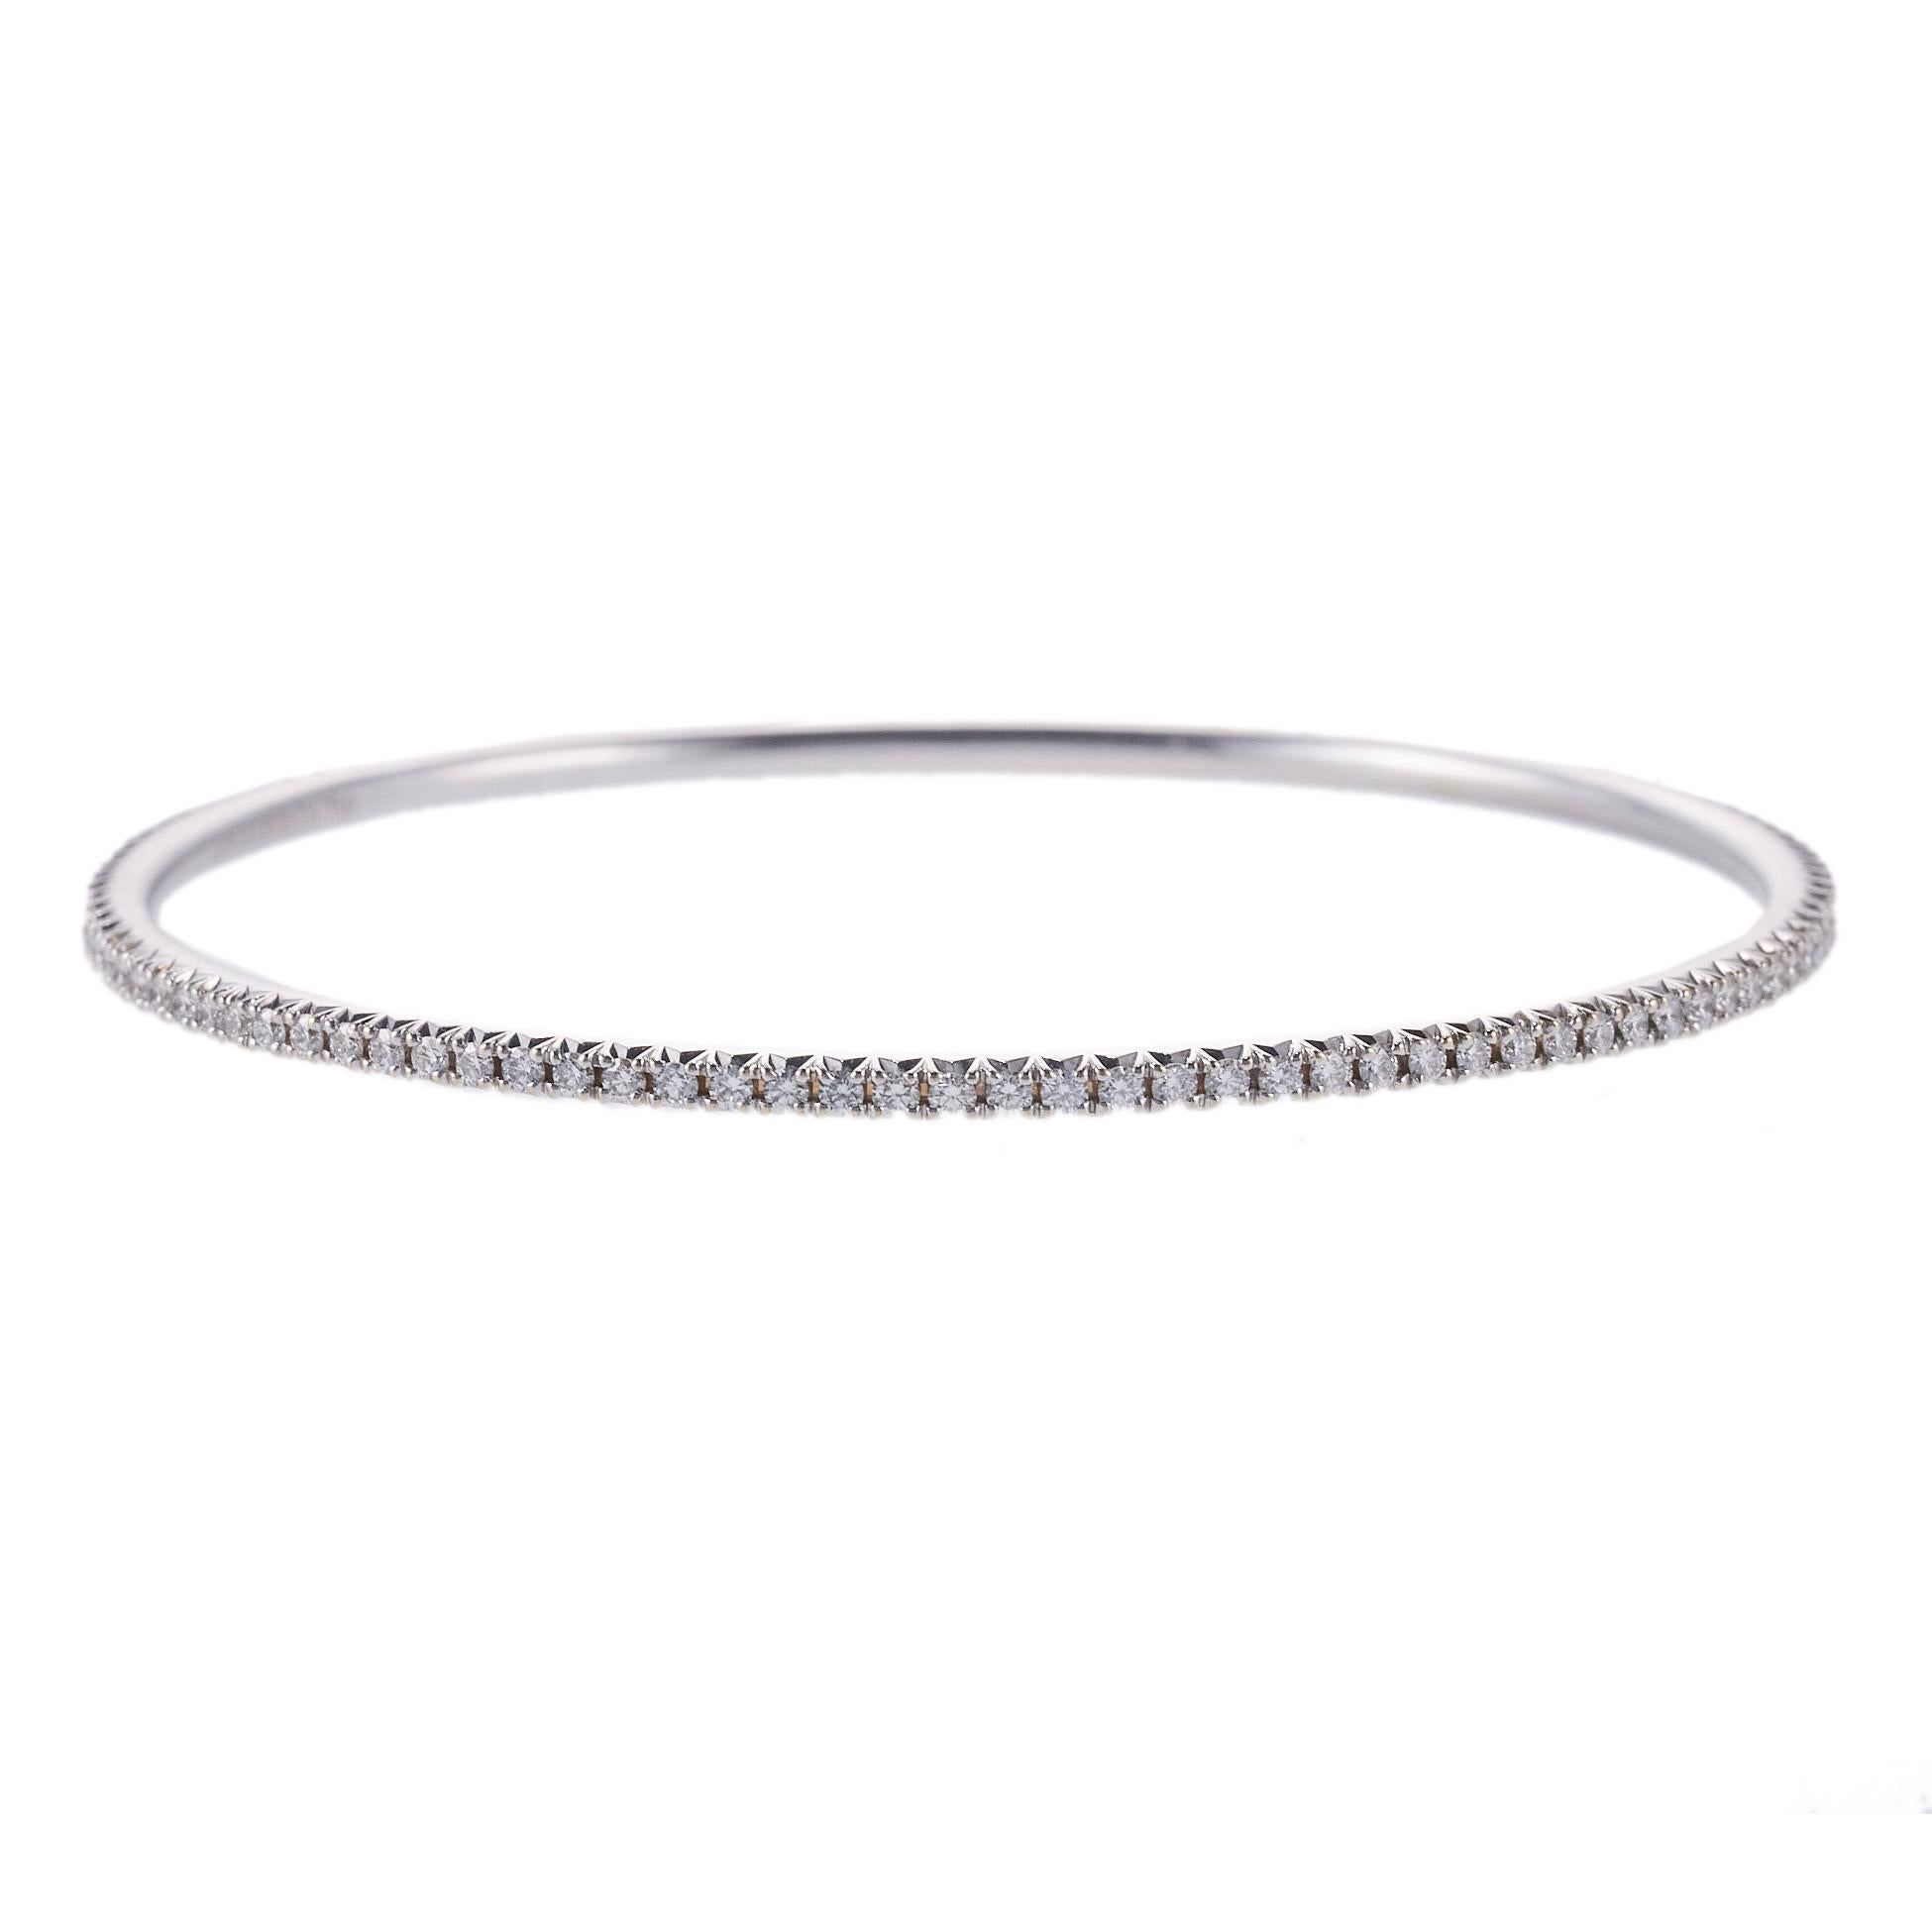 Delicate 18k white gold Metro collection bracelet by Tiffany & Co, set with approx. 2.12ctw in VS/G diamonds. Bracelet will fit approx. 7